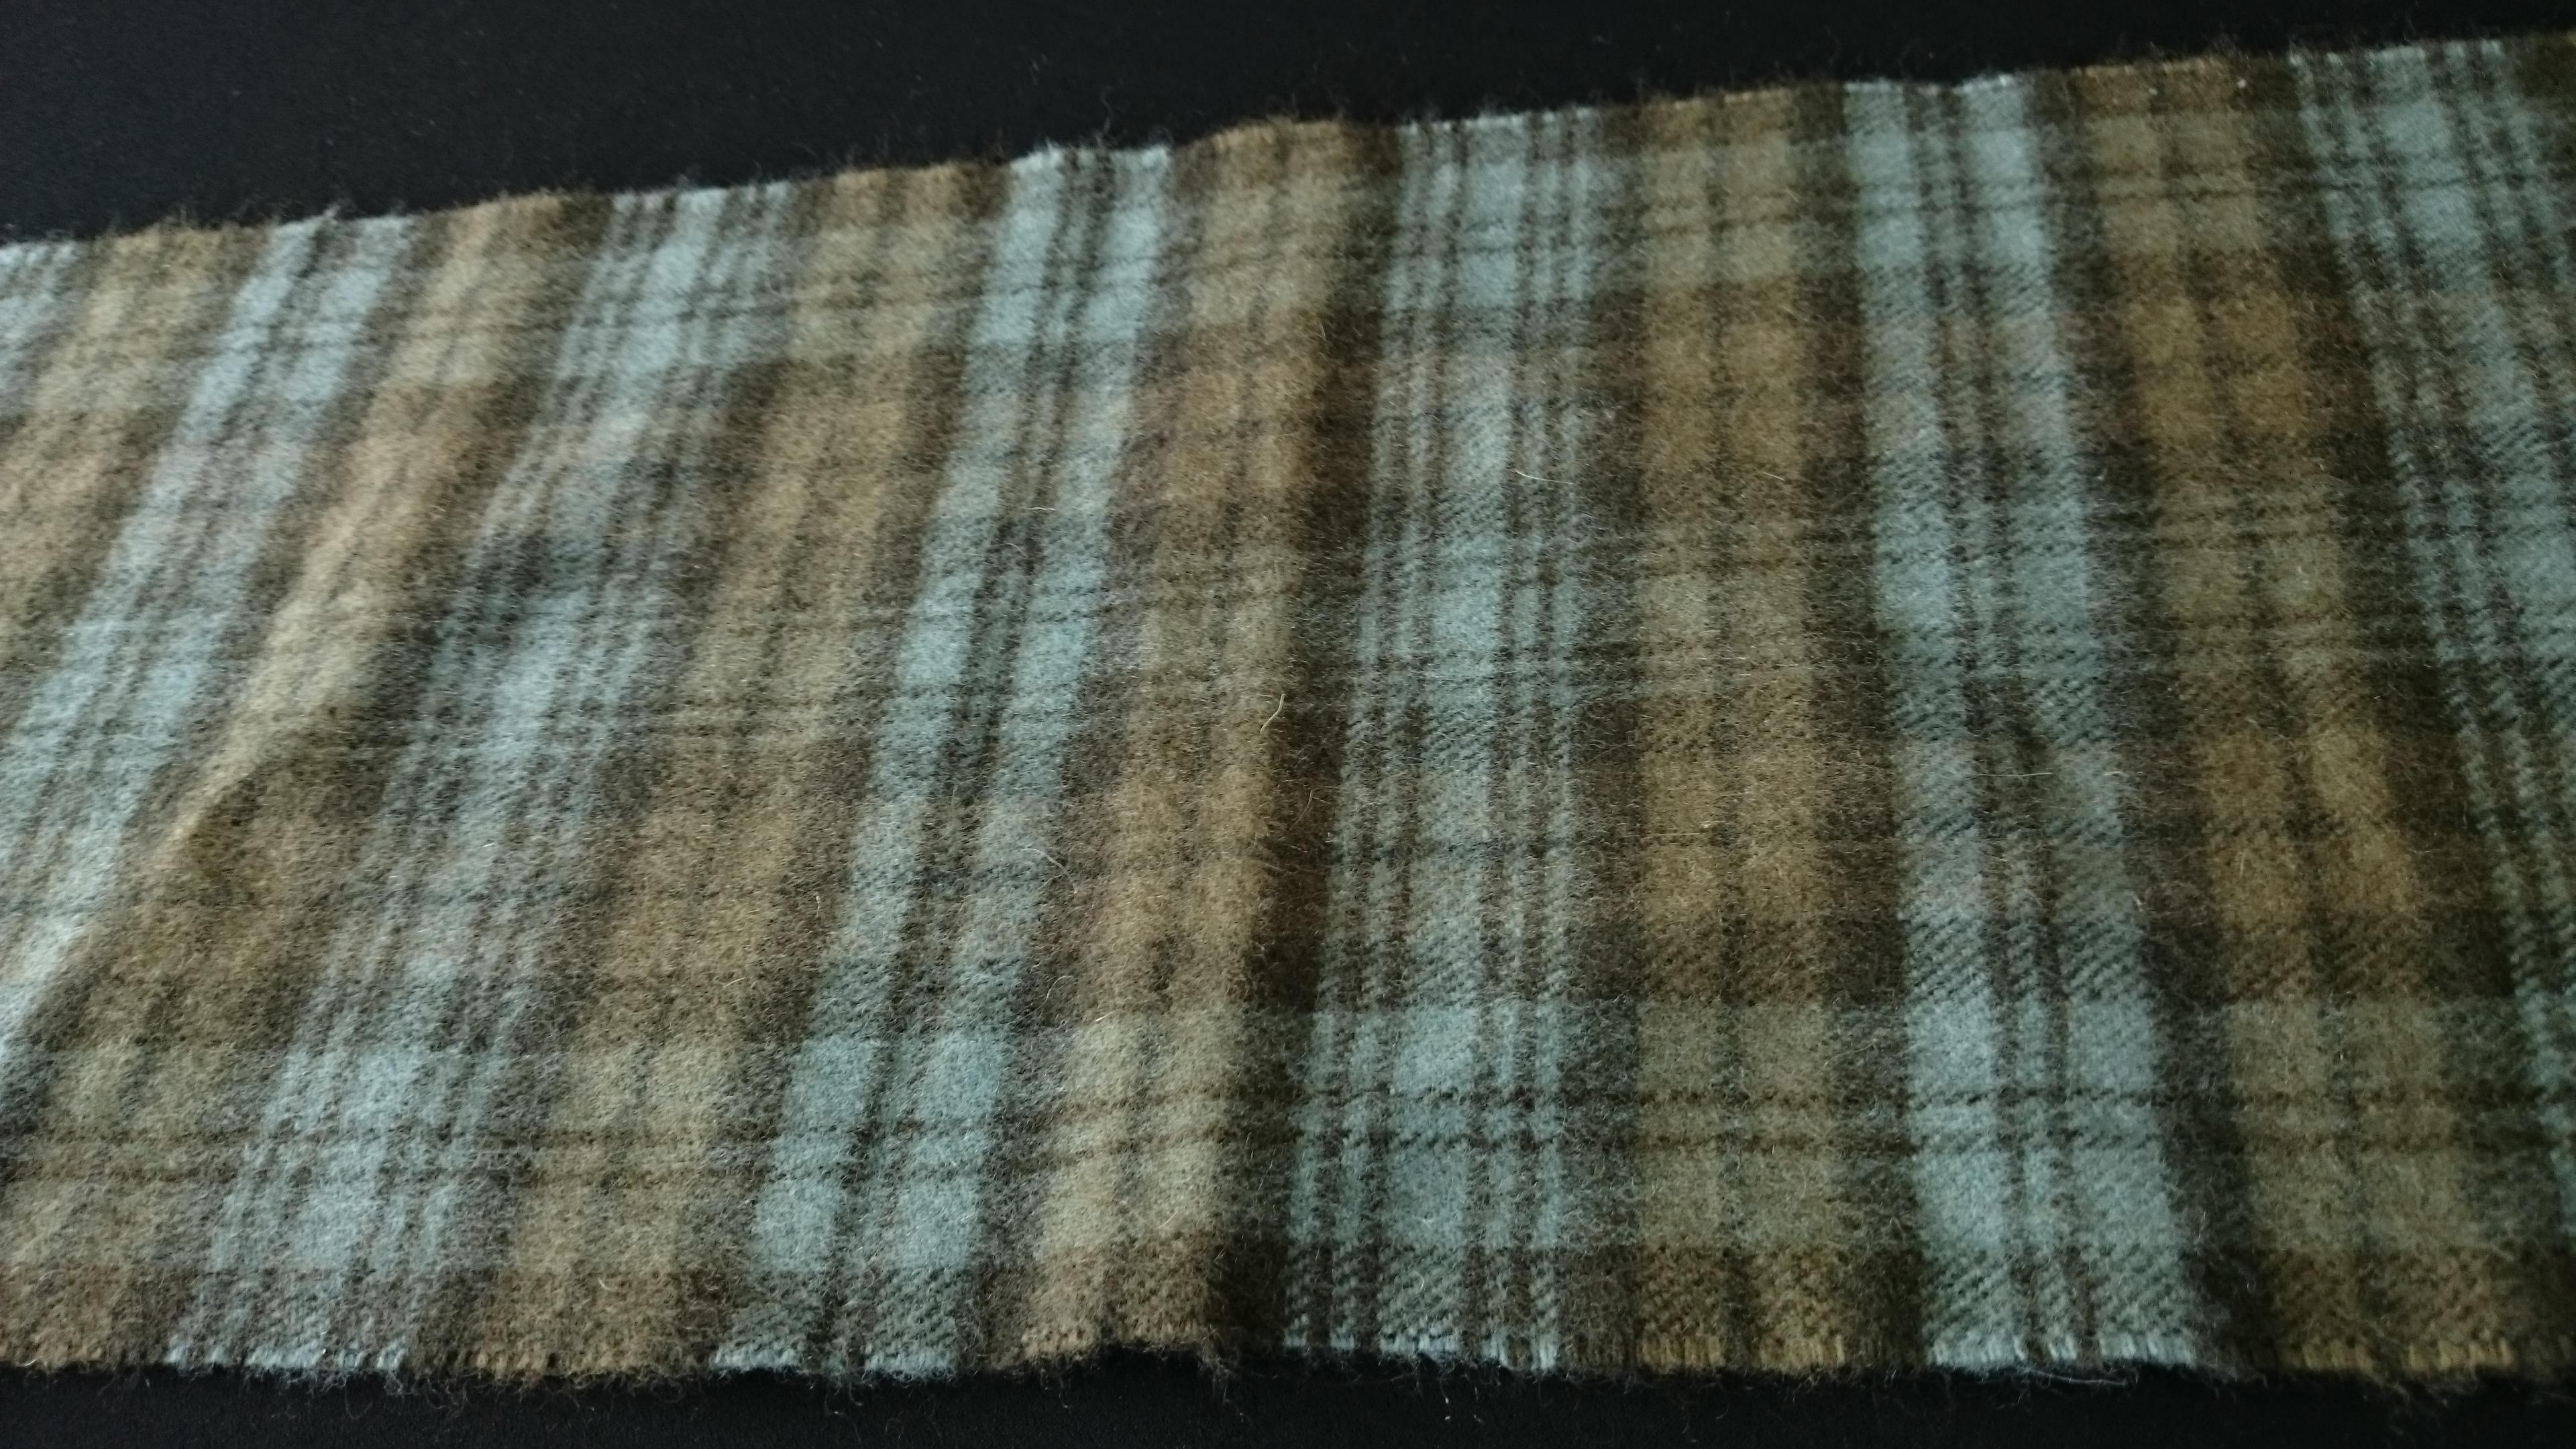 The Scotch House Scarf
70% Scottish Cashmere
30% Wool
Total length: 117 cm
Length: 111 cm
Width: 21 cm
Stripes: 3 cm 
Made in Scotland. 
